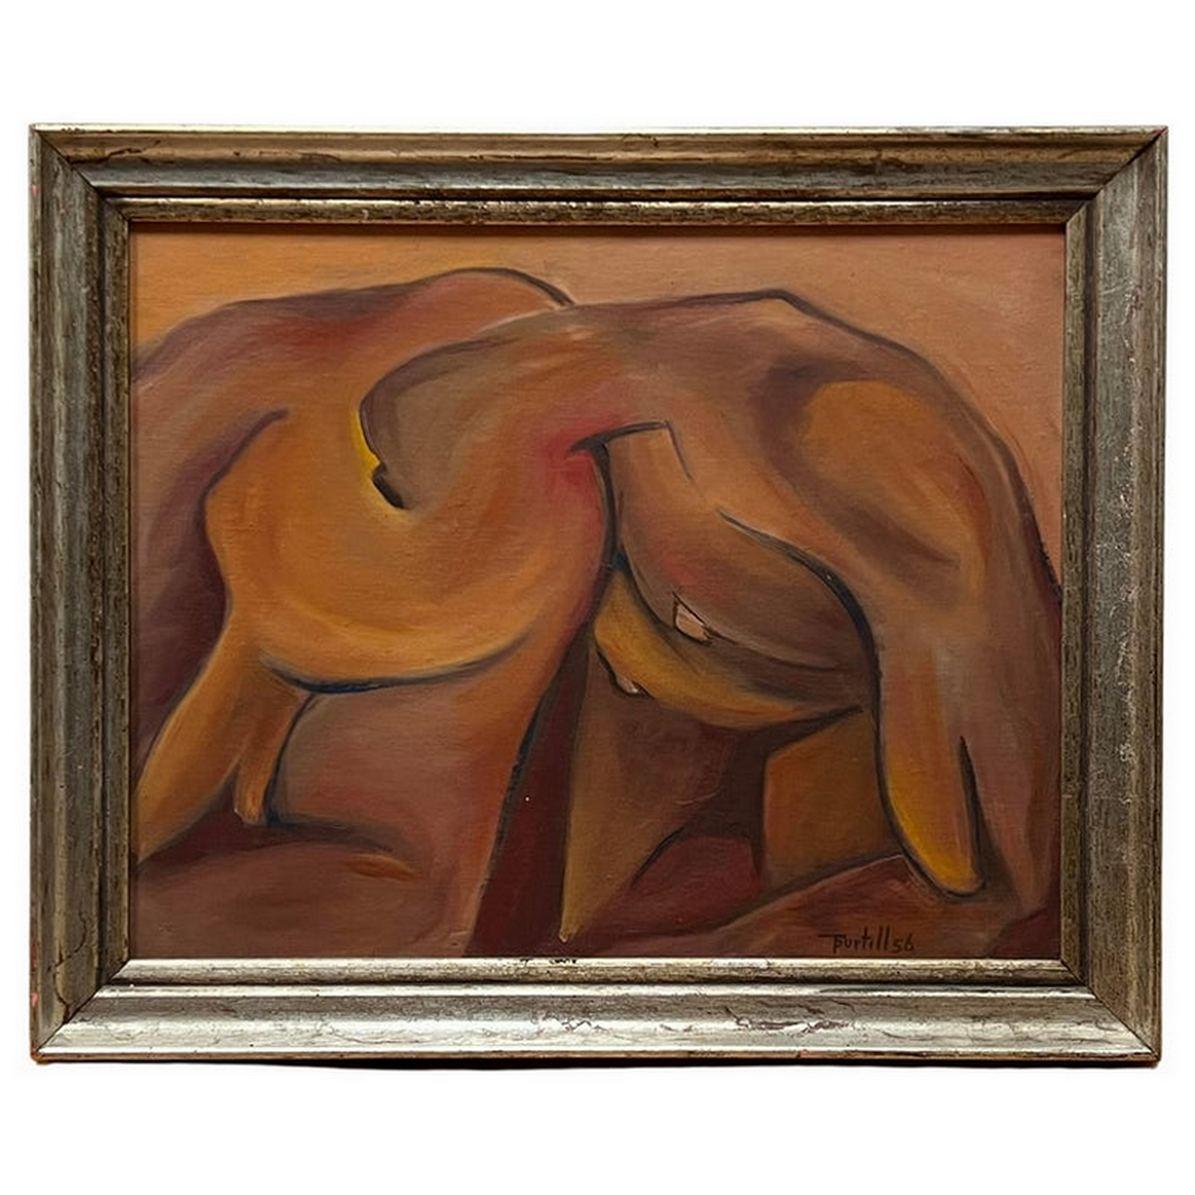 This mesmerizing oil painting celebrates the Abstract Expressionism movement with its vivid brushstrokes that move dynamically, from abstract lines to fully formed shapes. The warm hues of the piece bring out its enigmatic nature, depicting a couple